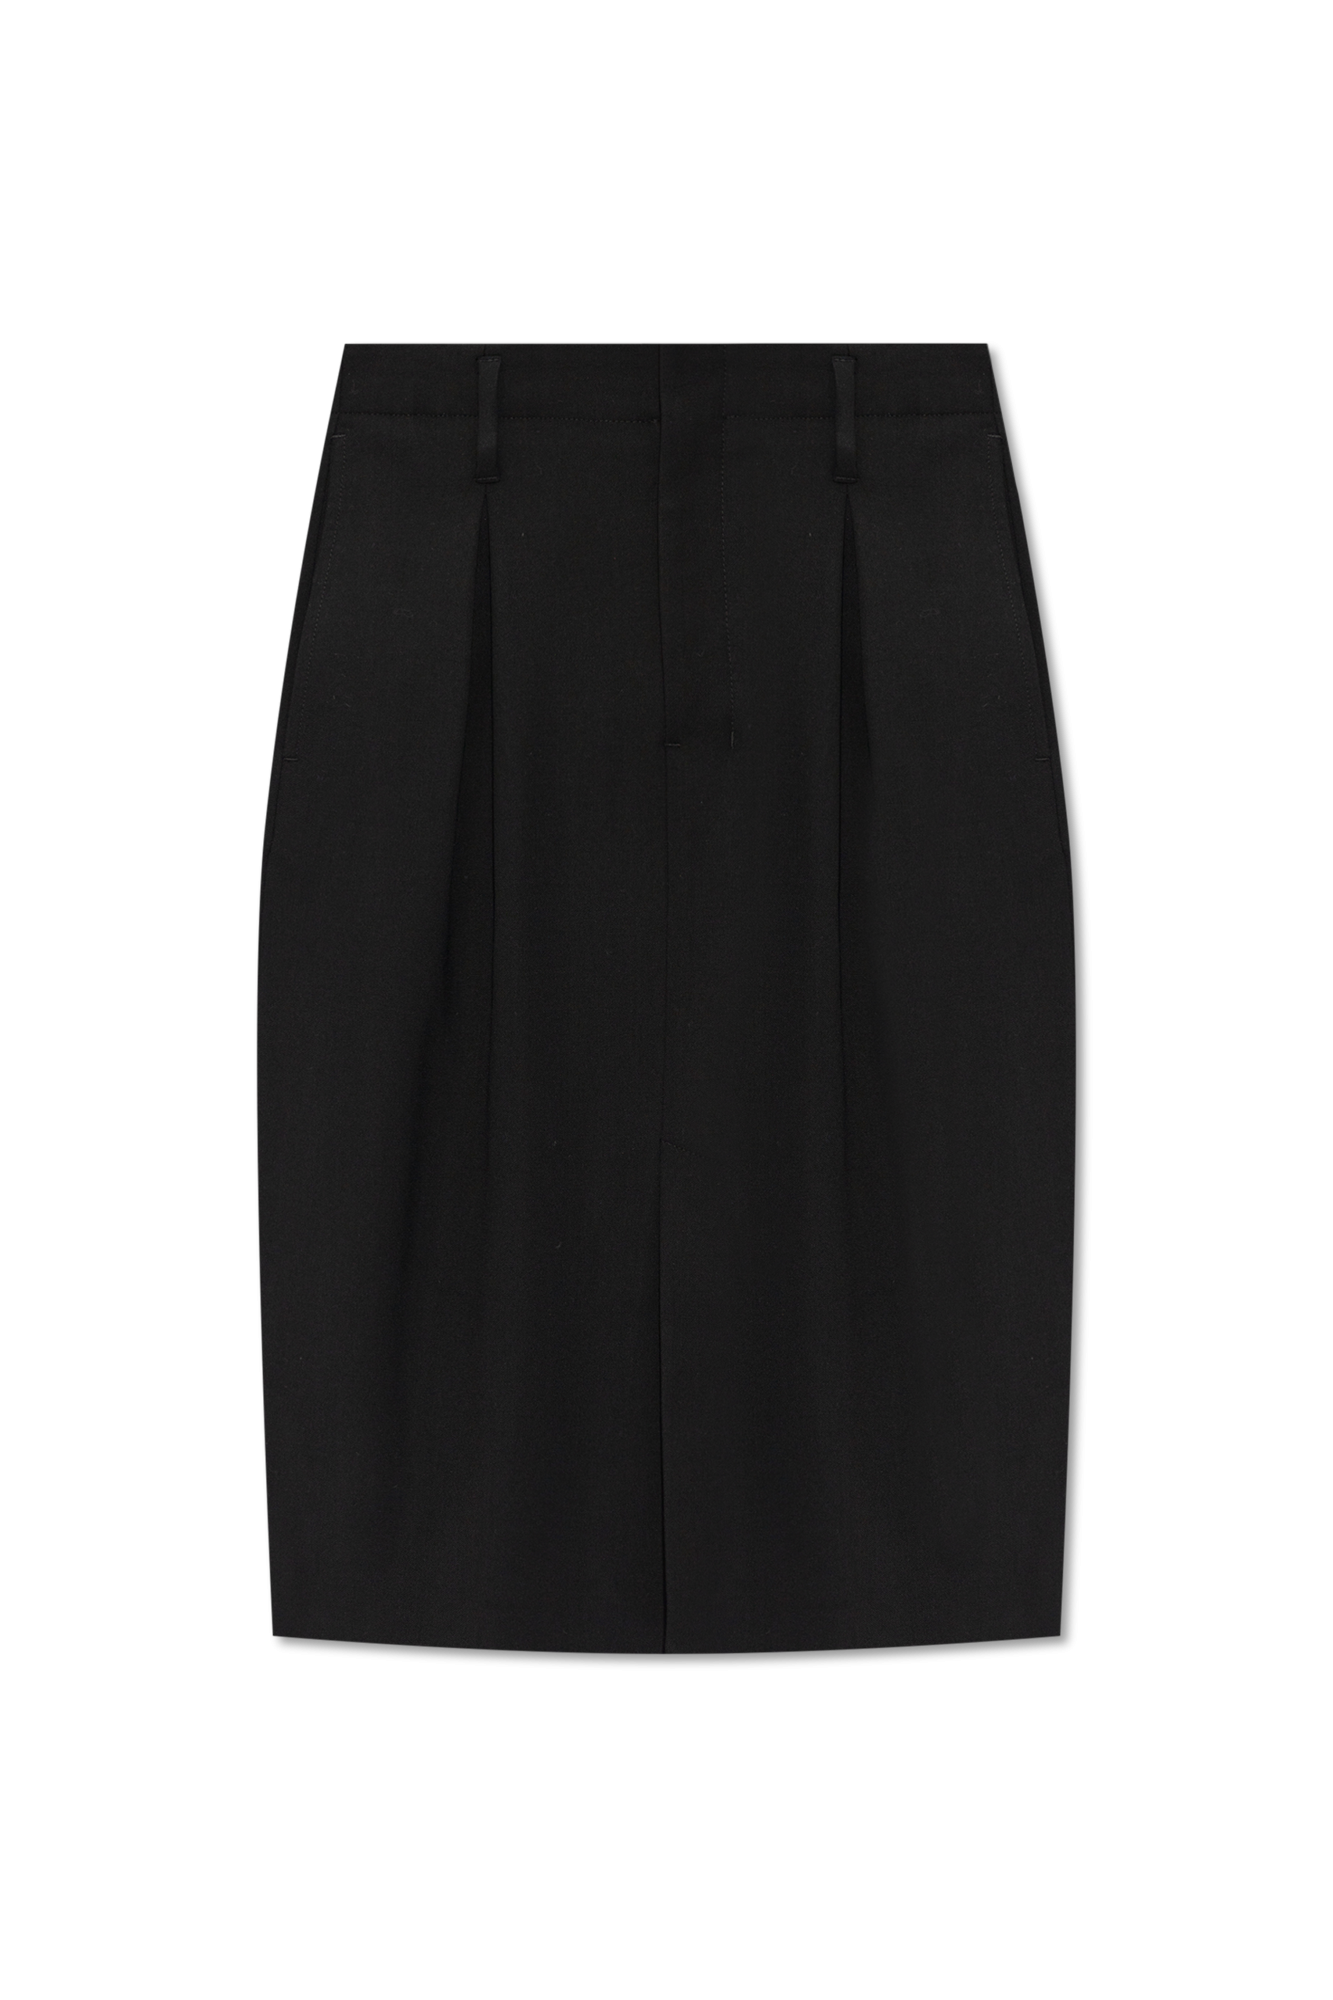 BABY 0-36 MONTHS Skirt with pleats